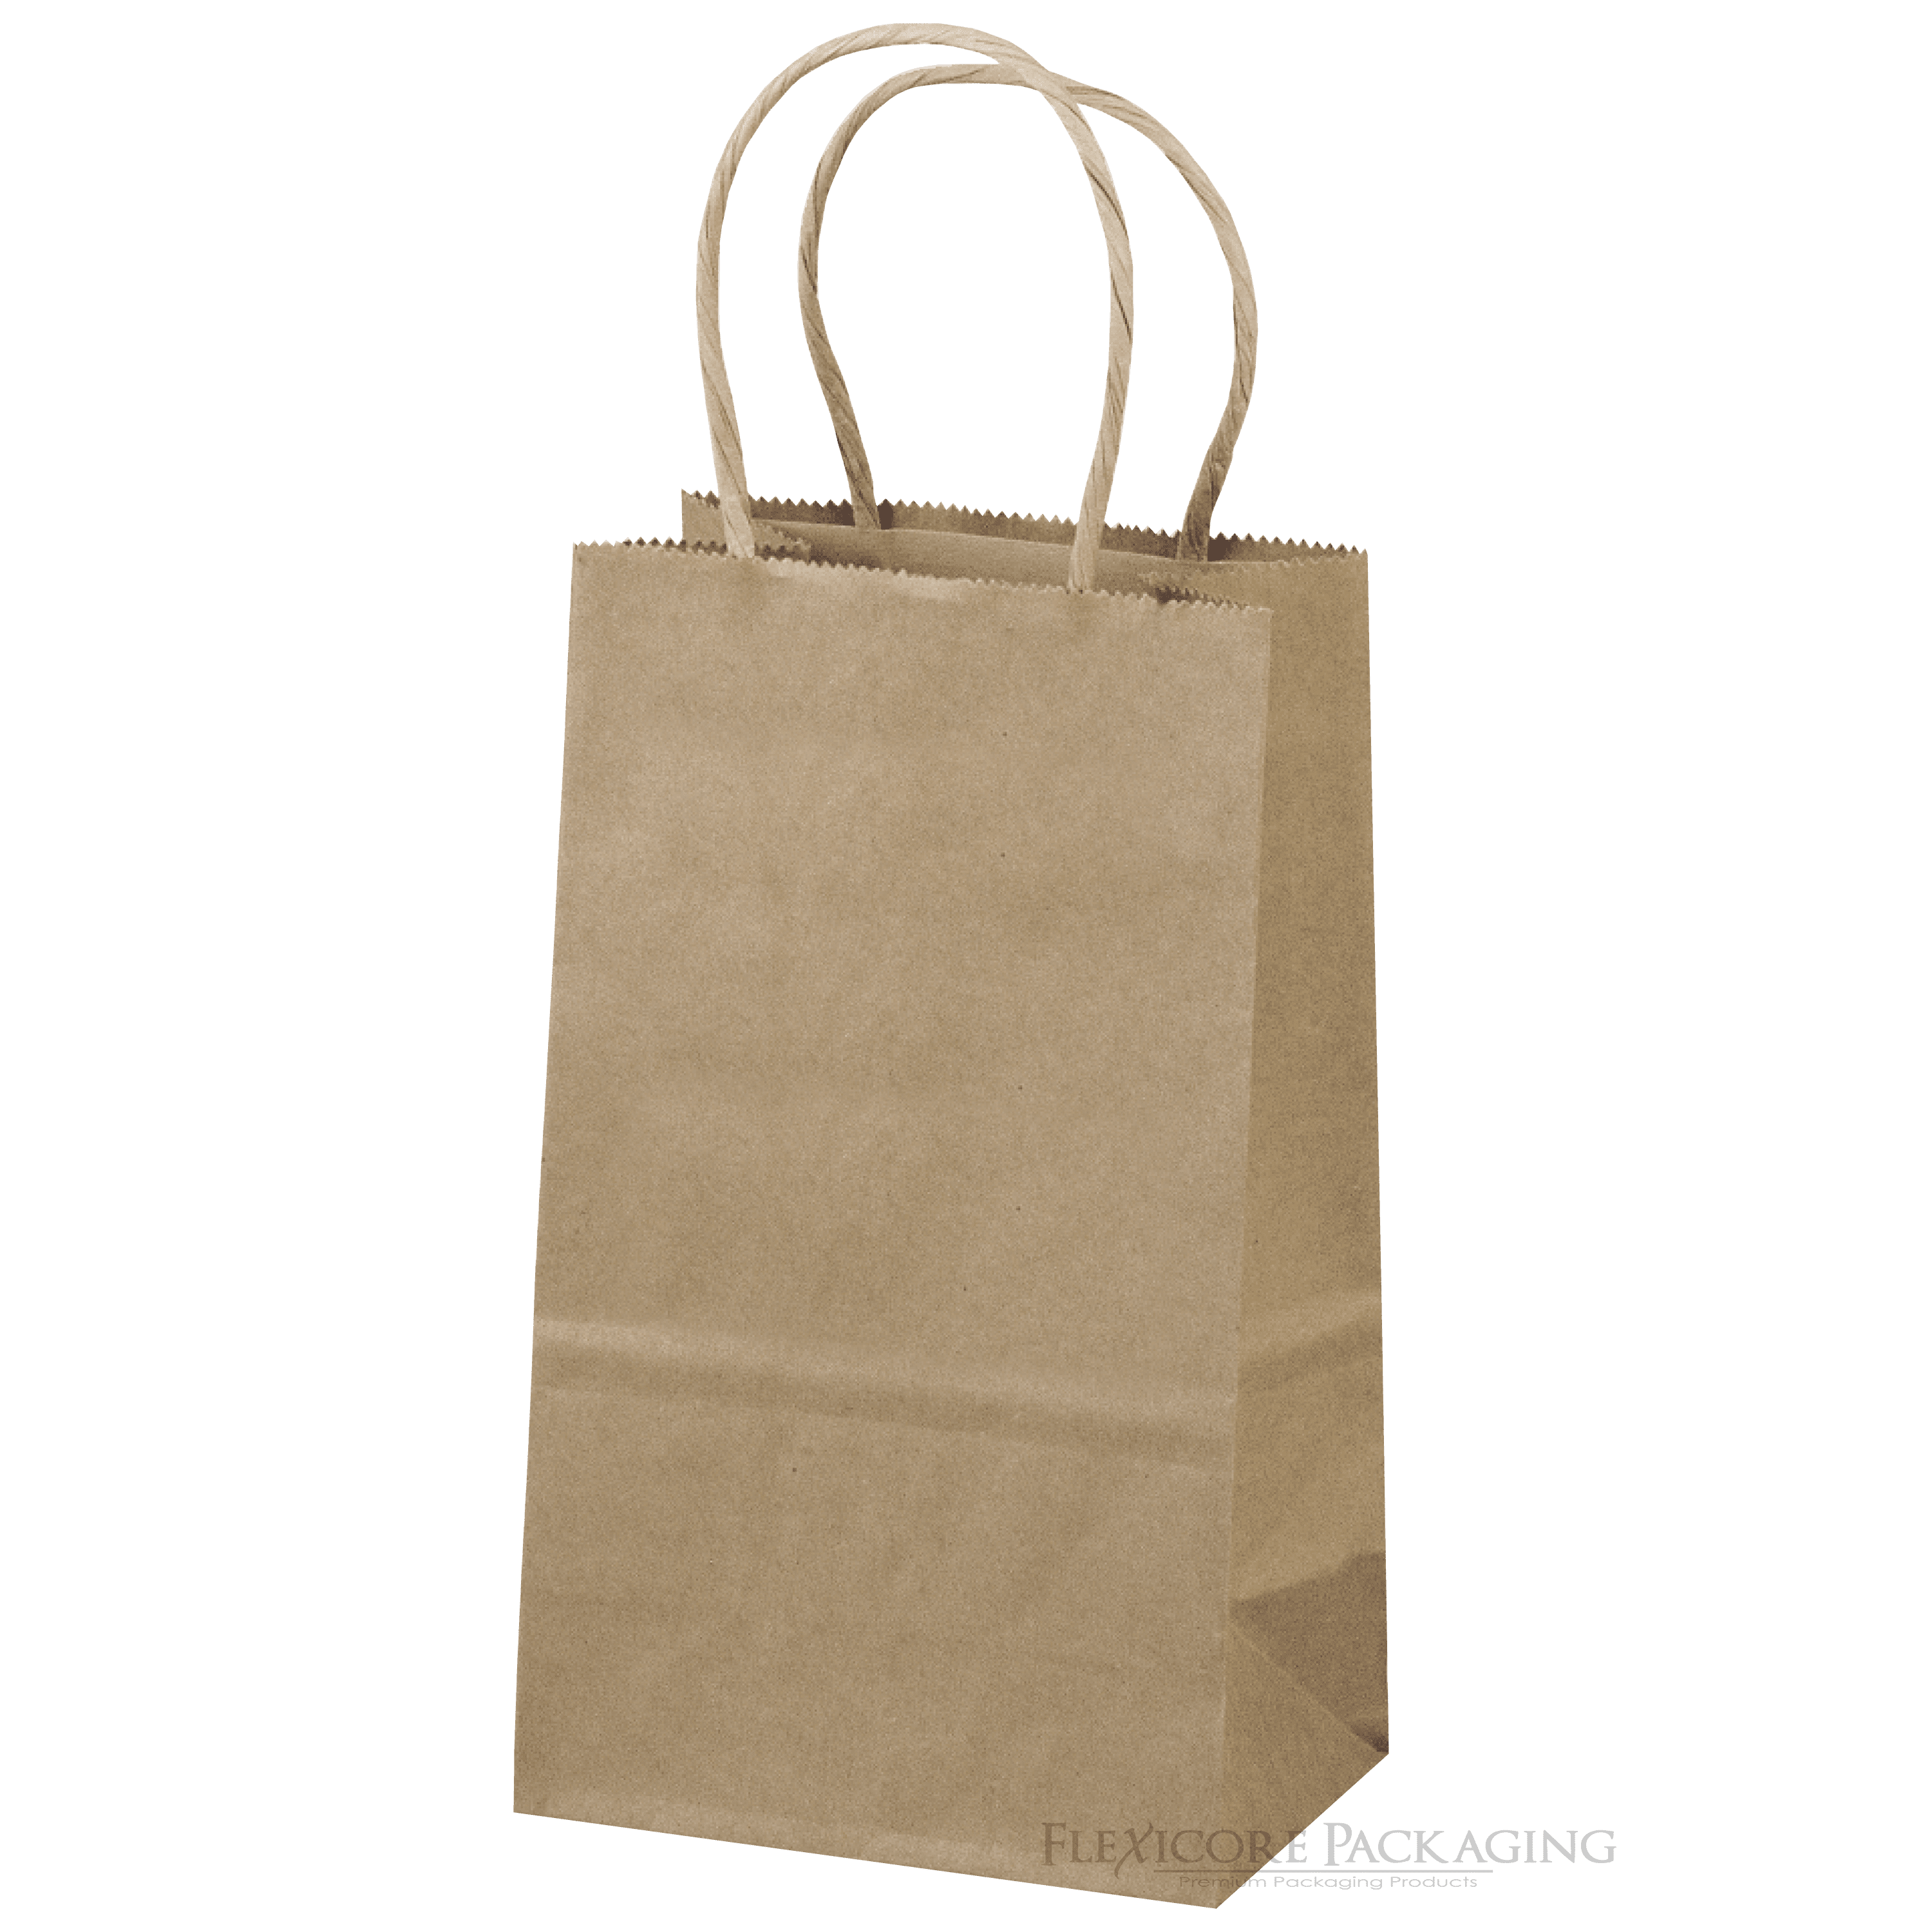 Merchandise Party Favors 100 pcs 4 X 6 Brown Kraft Paper Bags for Candy Cookies Crafts Small Gifts Gift Bags Jewelry 